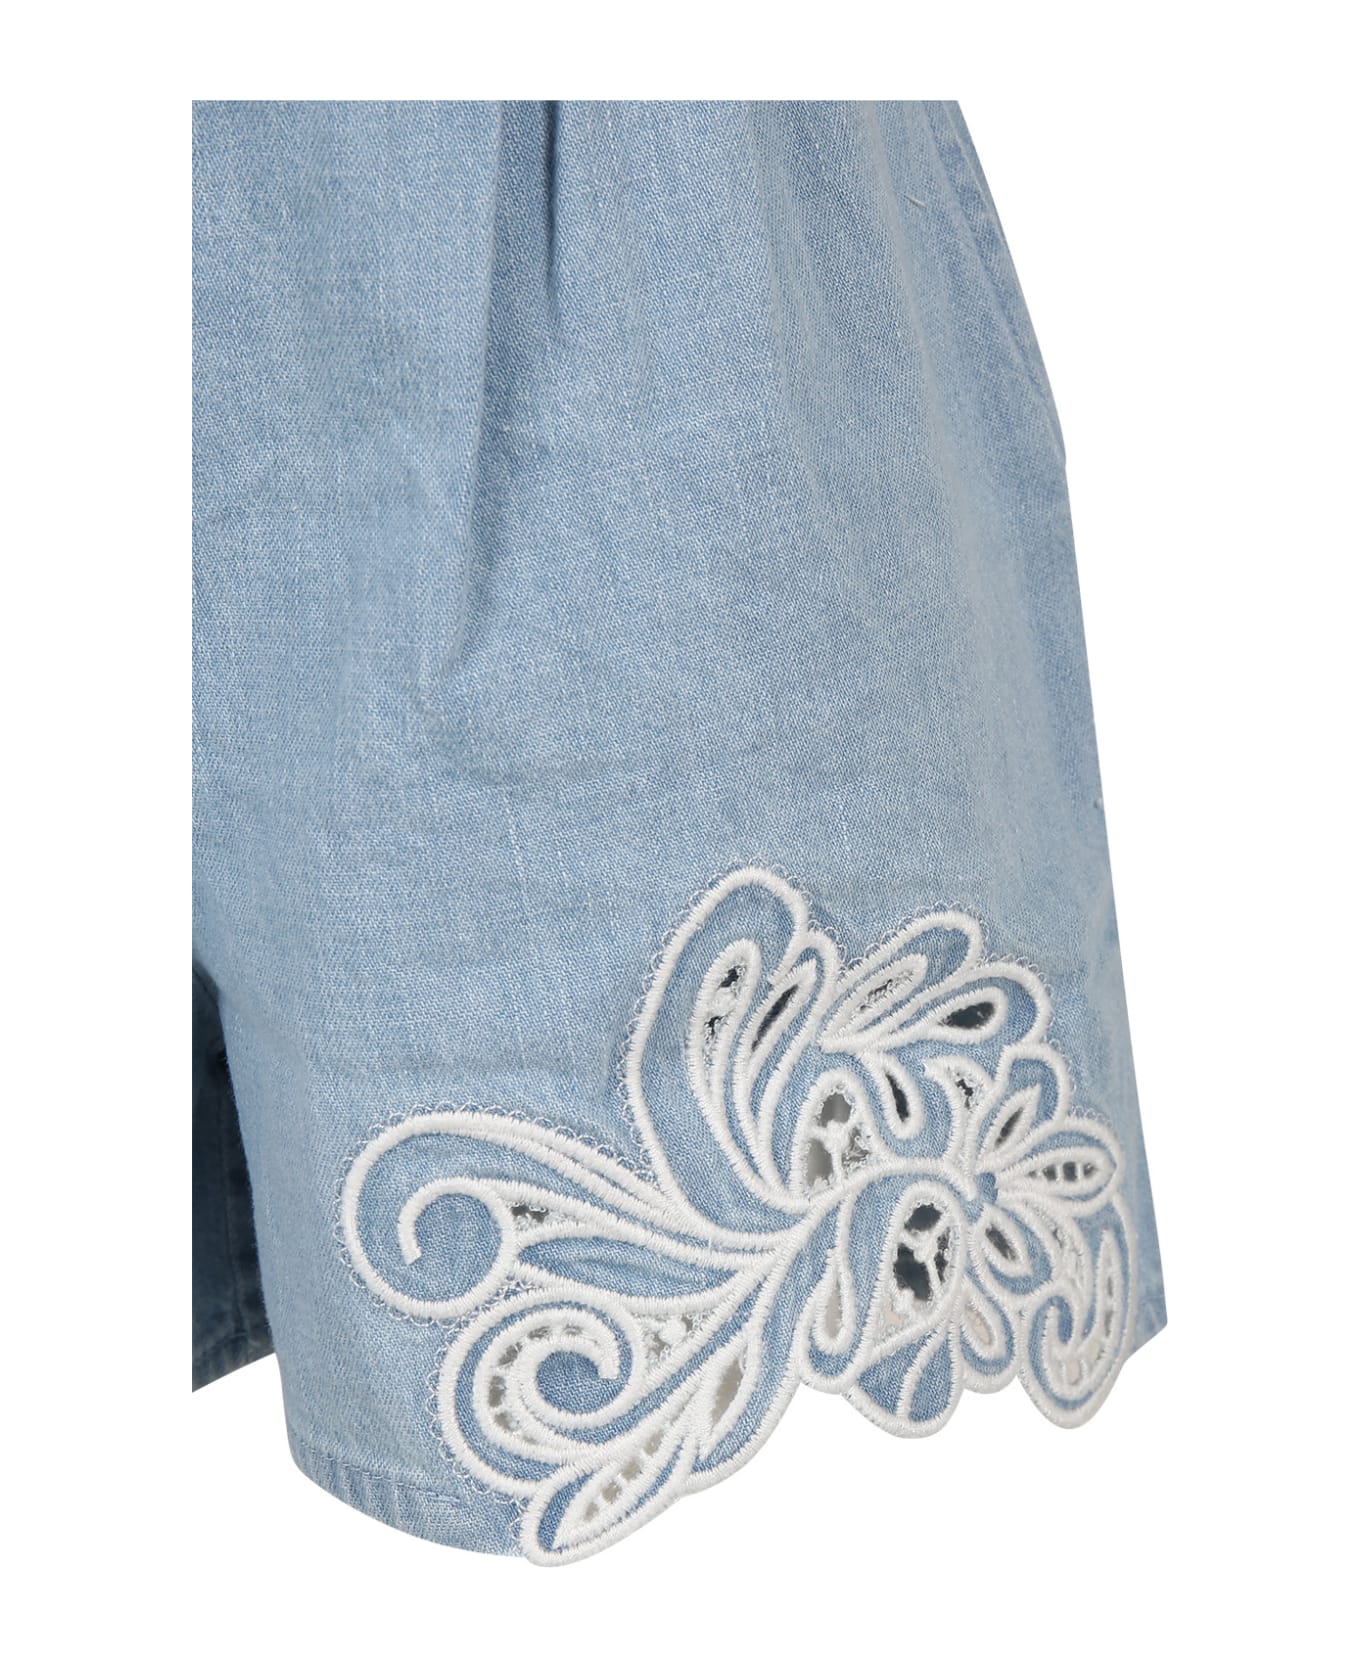 Ermanno Scervino Junior Blue Shorts For Girl With Embroidery - Denim ボトムス